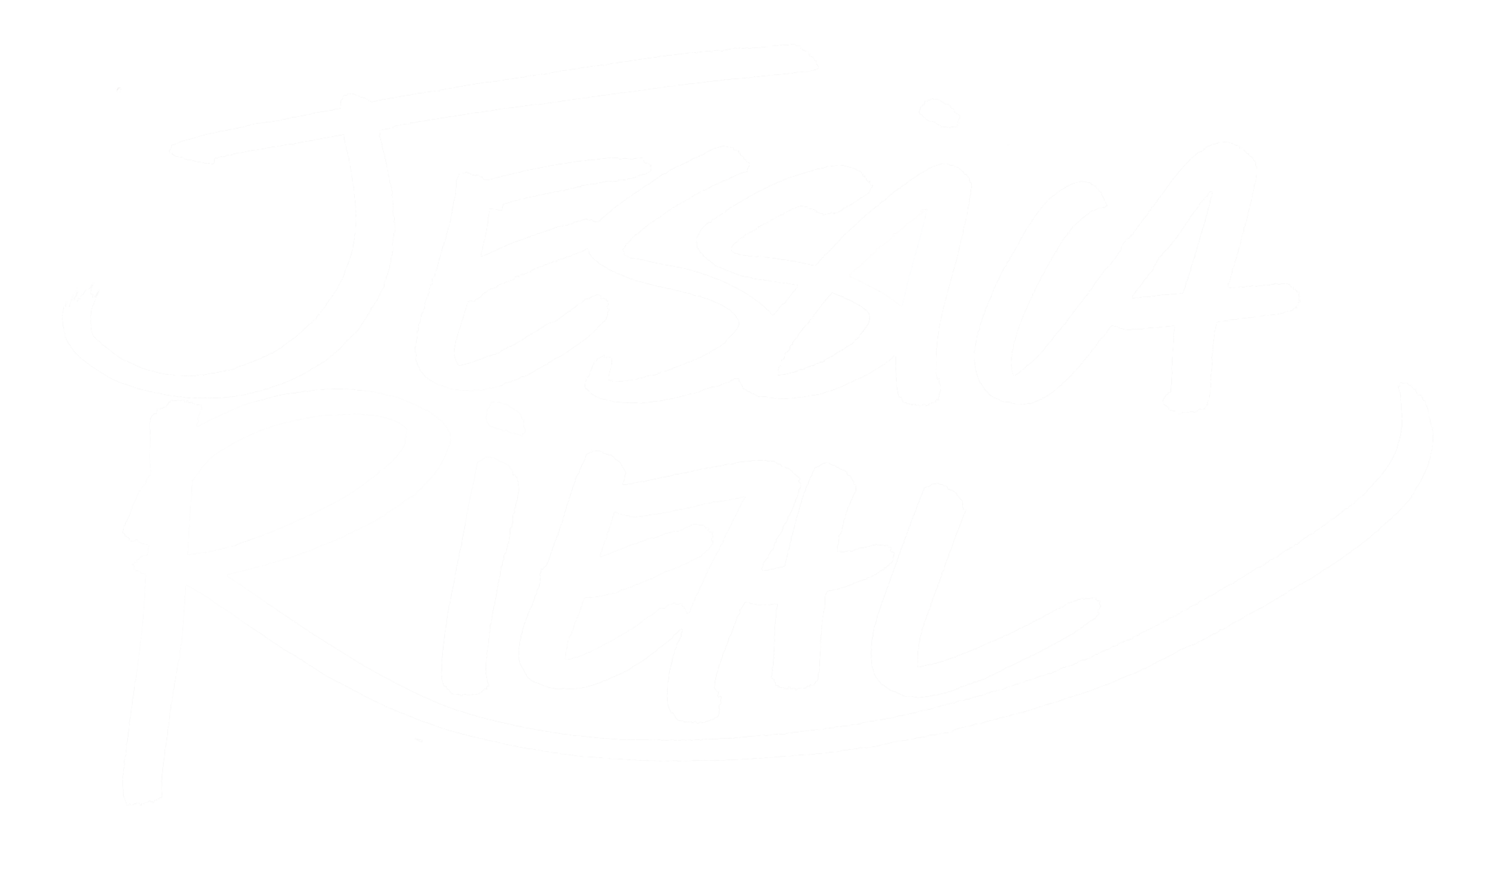 JESSICA RIEHL CONSULTING